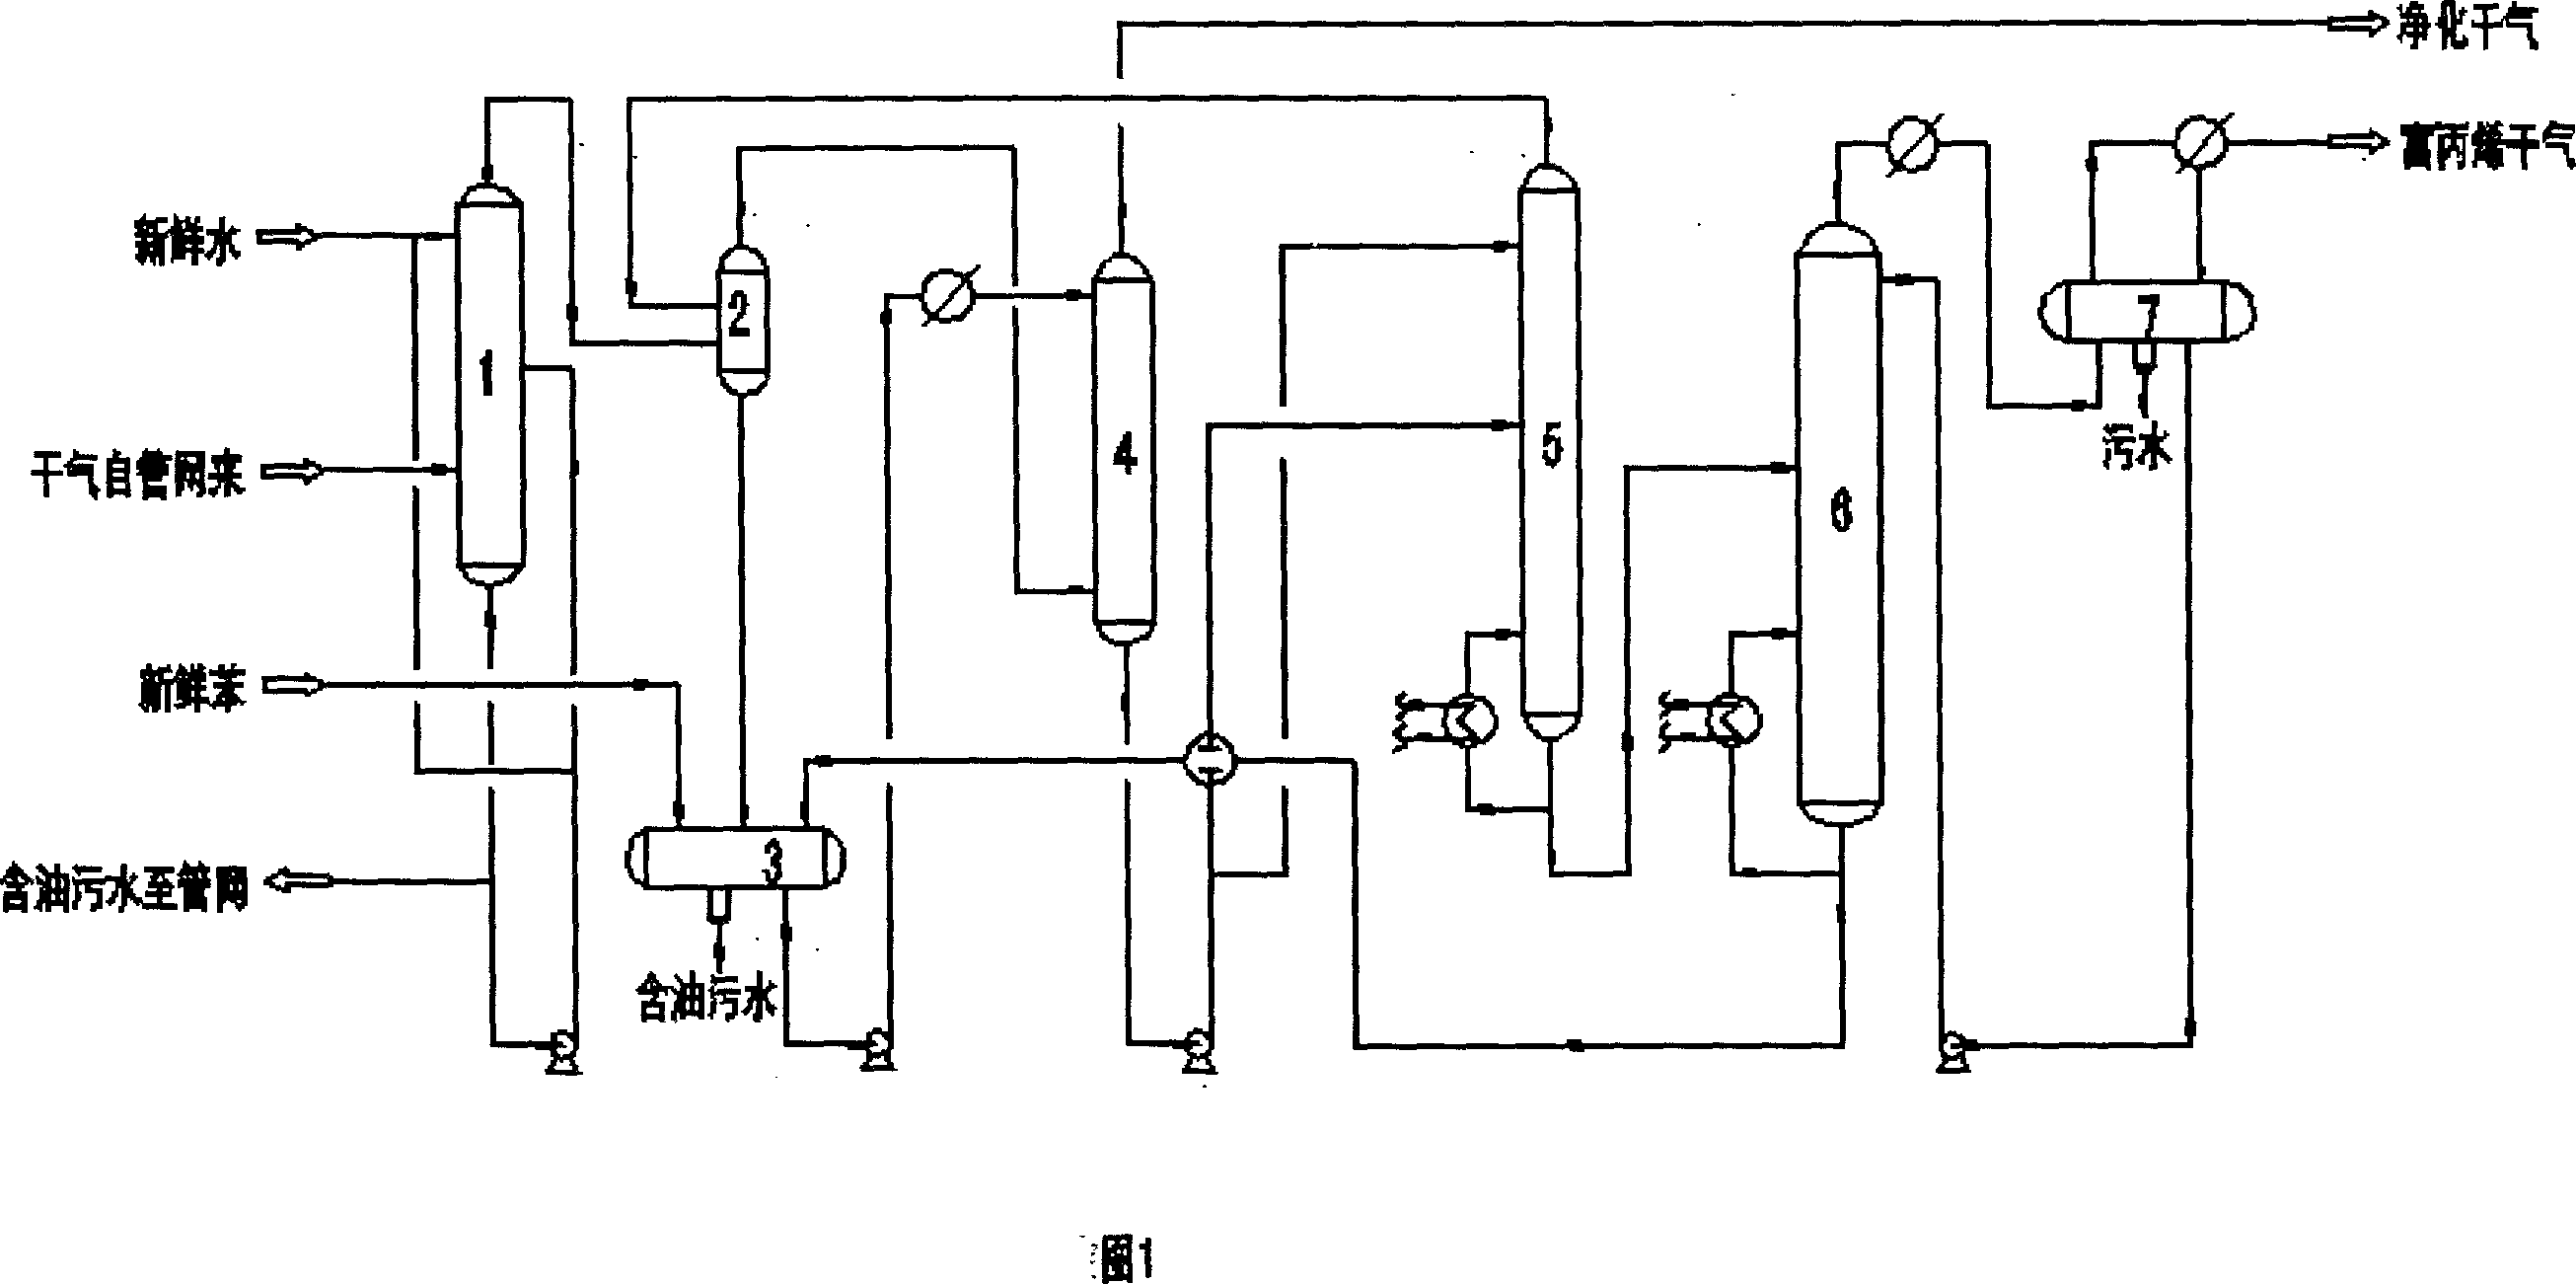 Process flow for raw material pretreatment portion of catalytic dry gas produced phenylethane